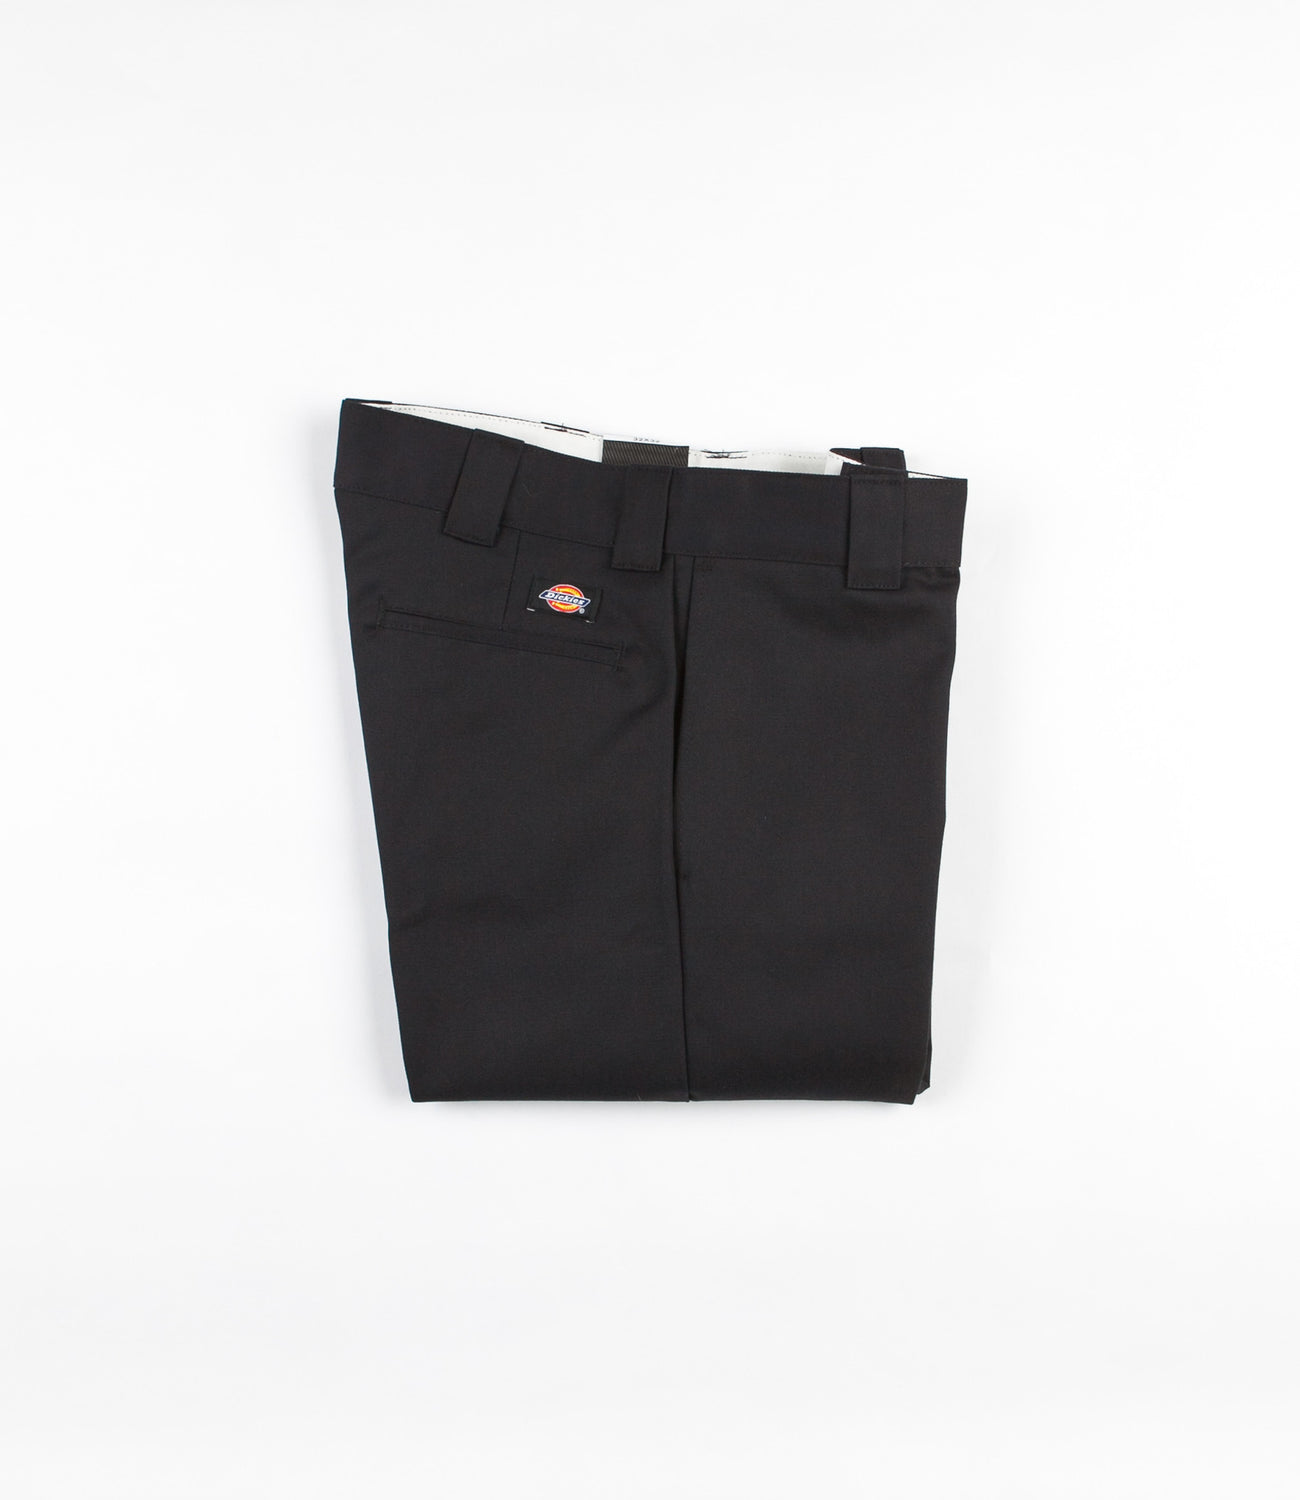 The 10 best black work pants for women in 2022